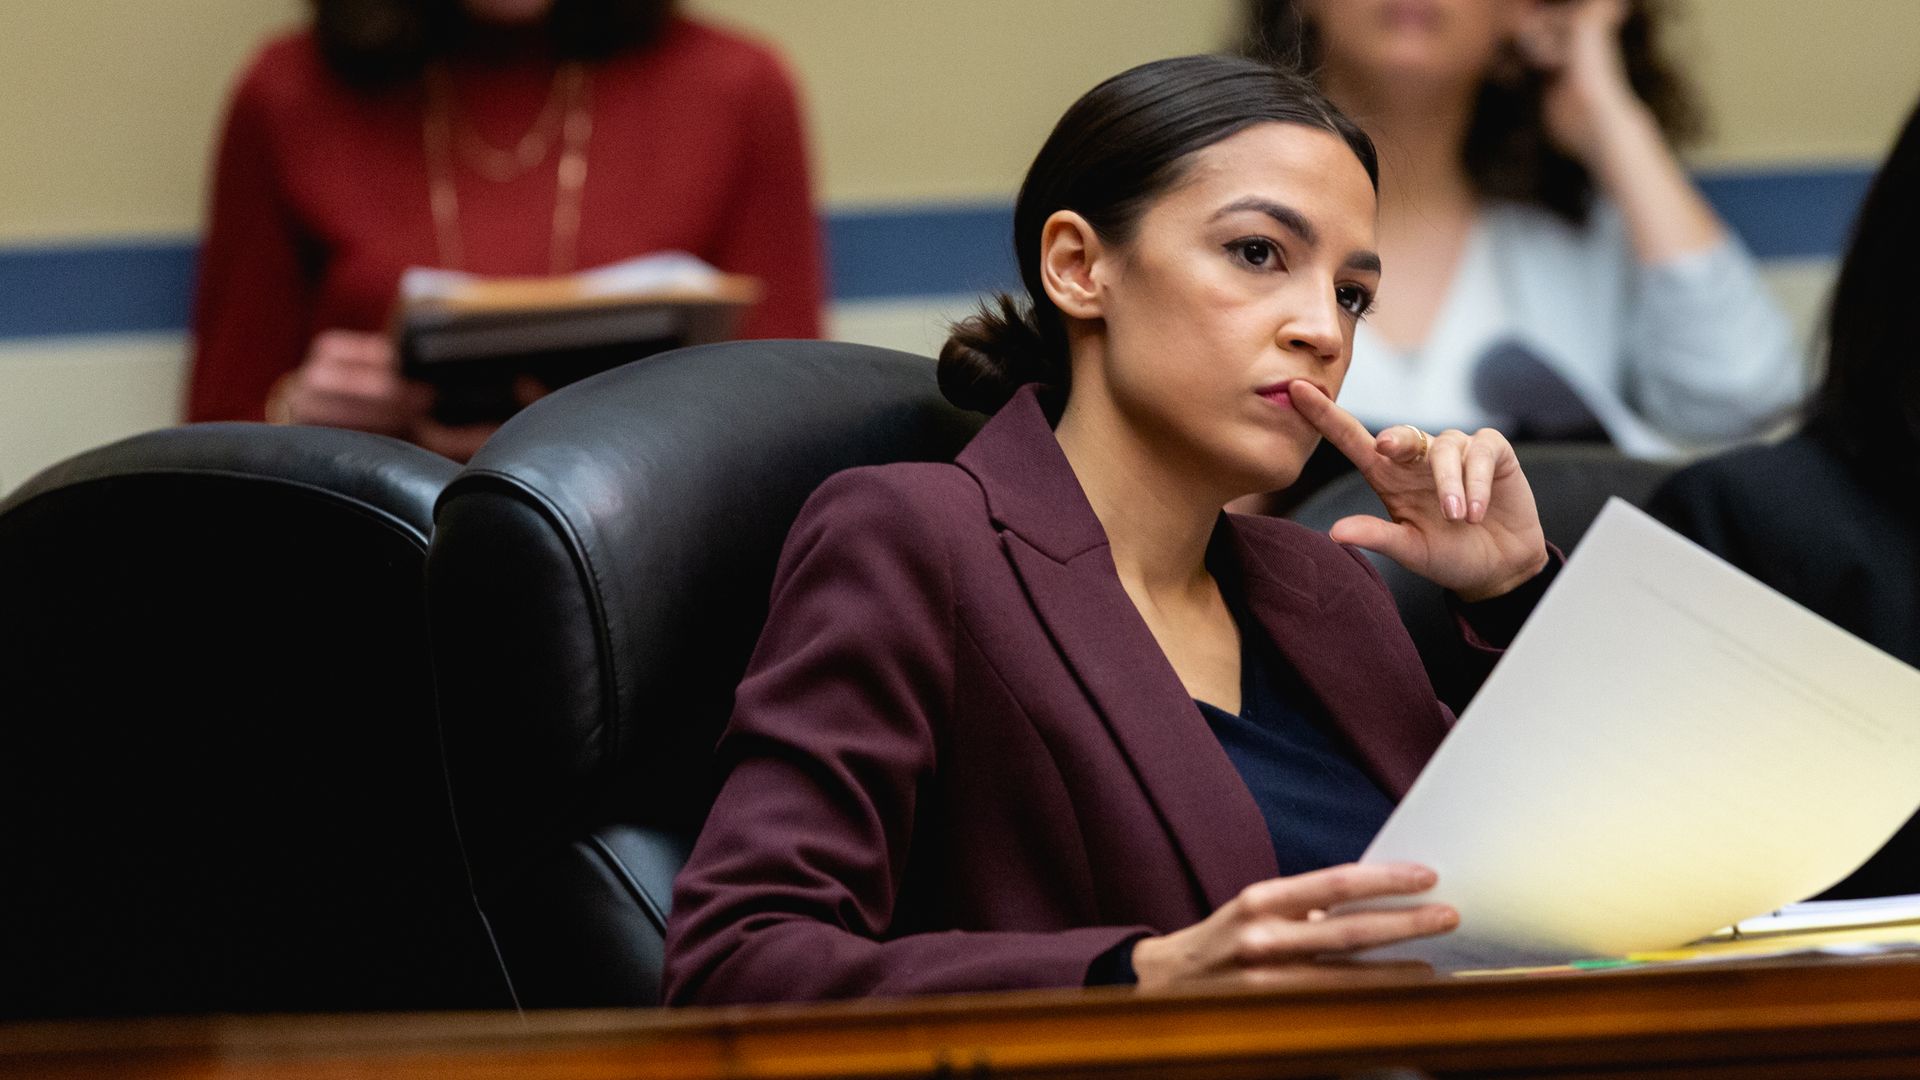 In this image, Alexandria Ocasio-Cortez sits and listens to Cohen's testimony while holding papers.